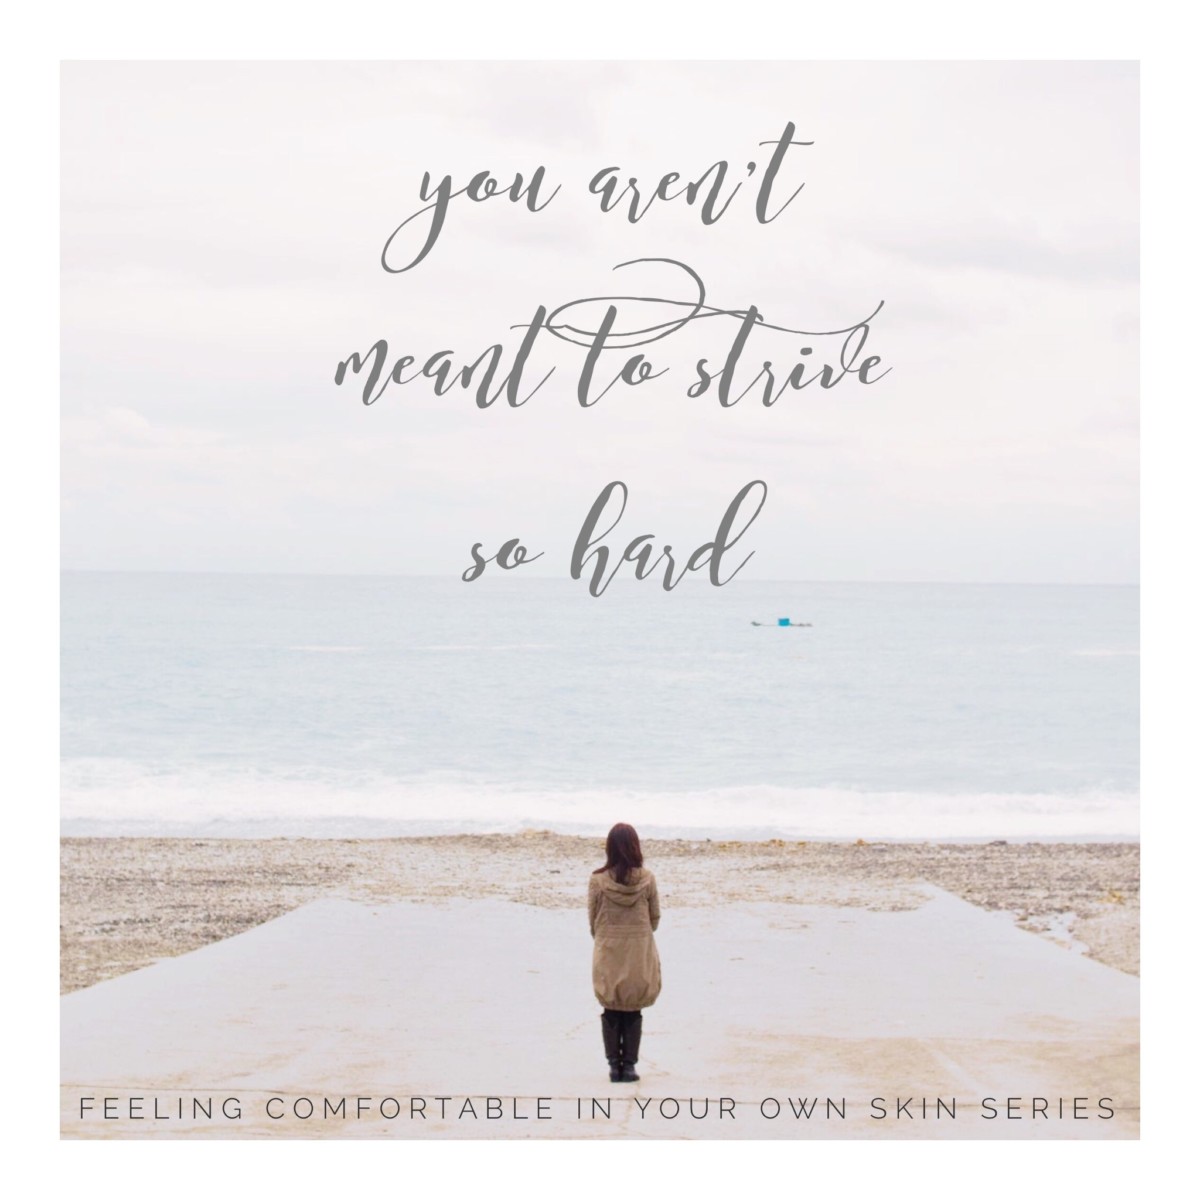 aren't to strive so hard // feeling comfortable in your own skin series | Marlene